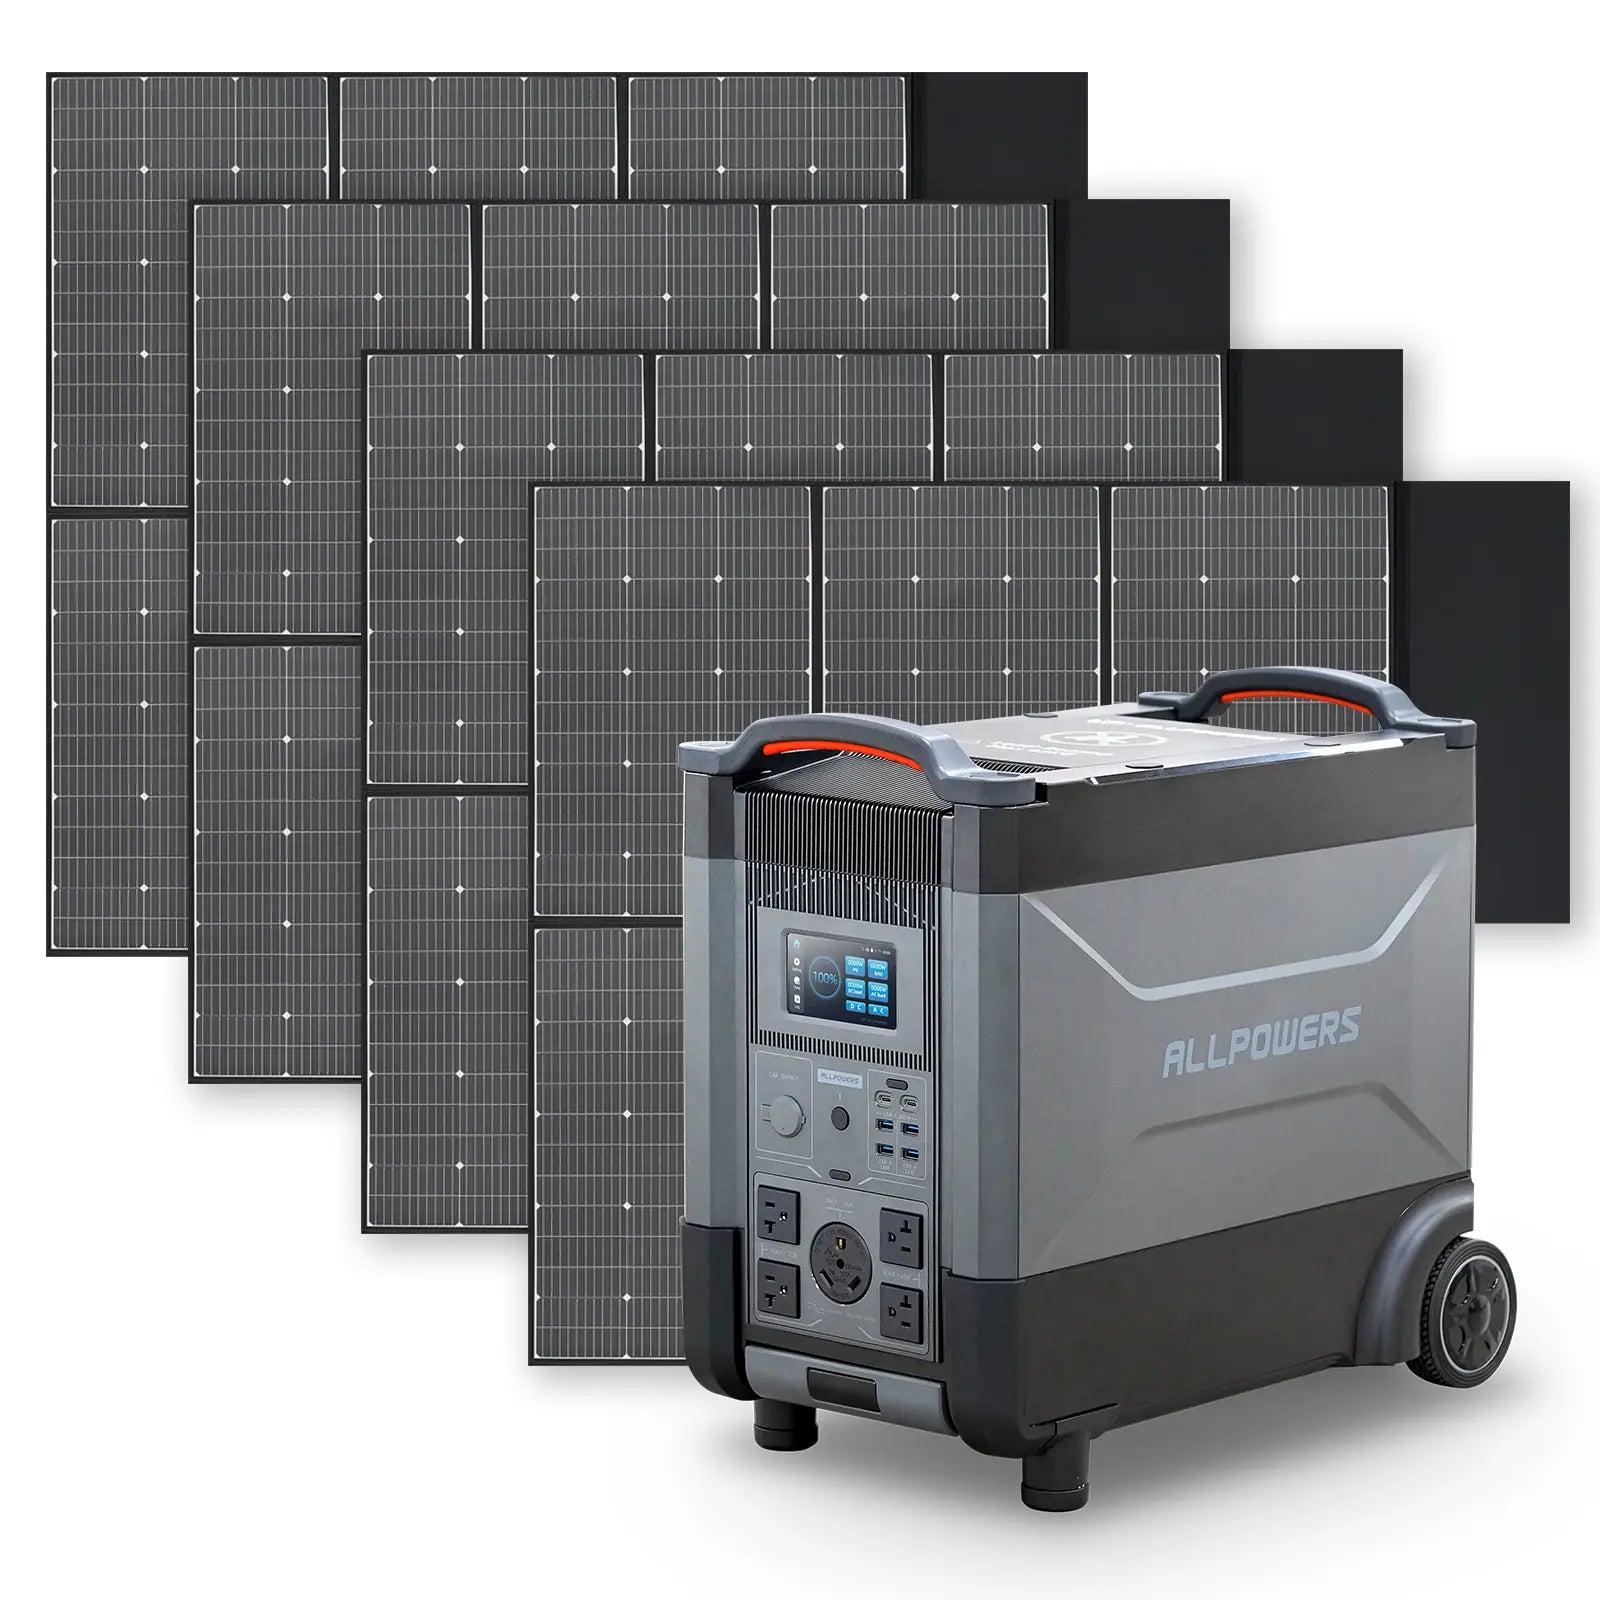 ALLPOWERS 700W Solar Generator with Solar Panel included, 606Wh